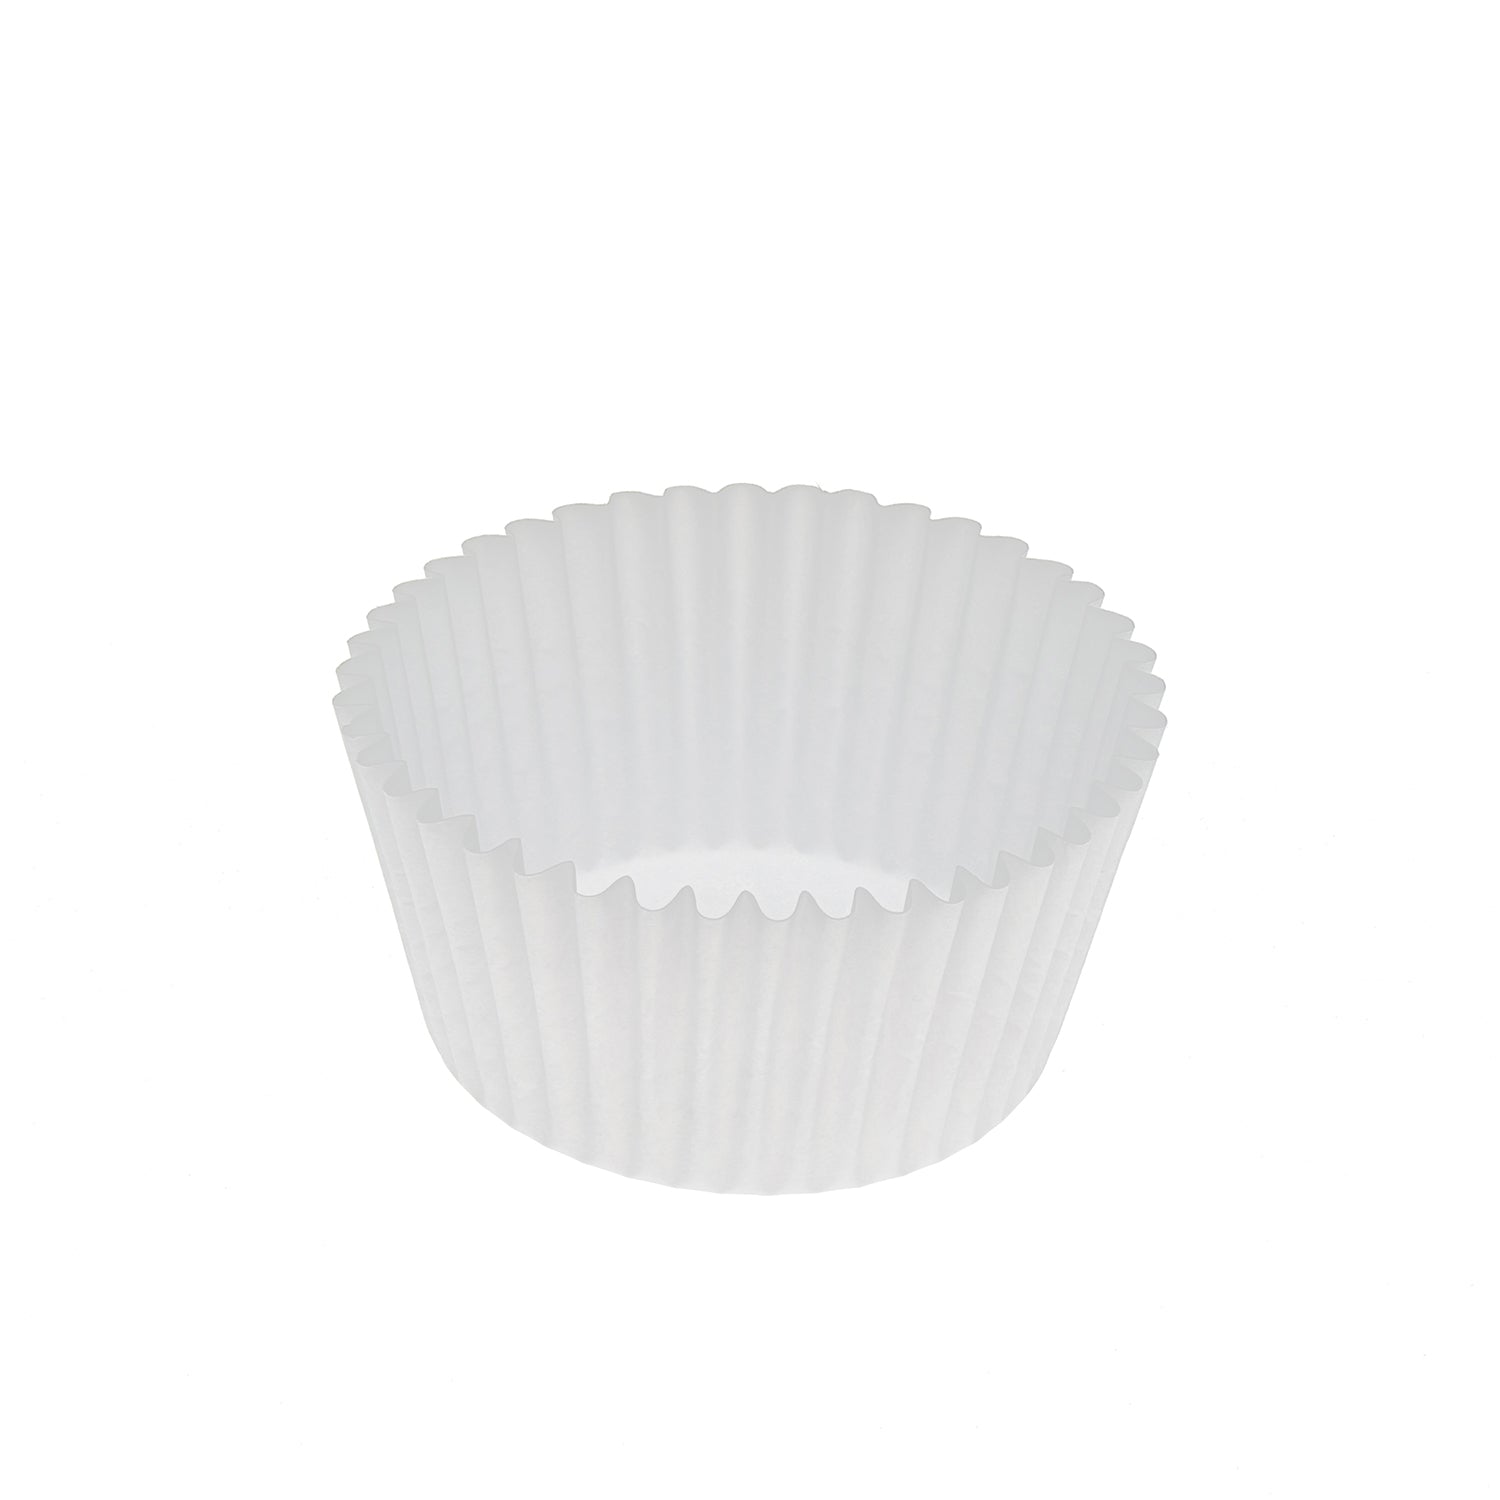 4.5 White Standard Size Baking Cups, Case of 10,000 – CiboWares